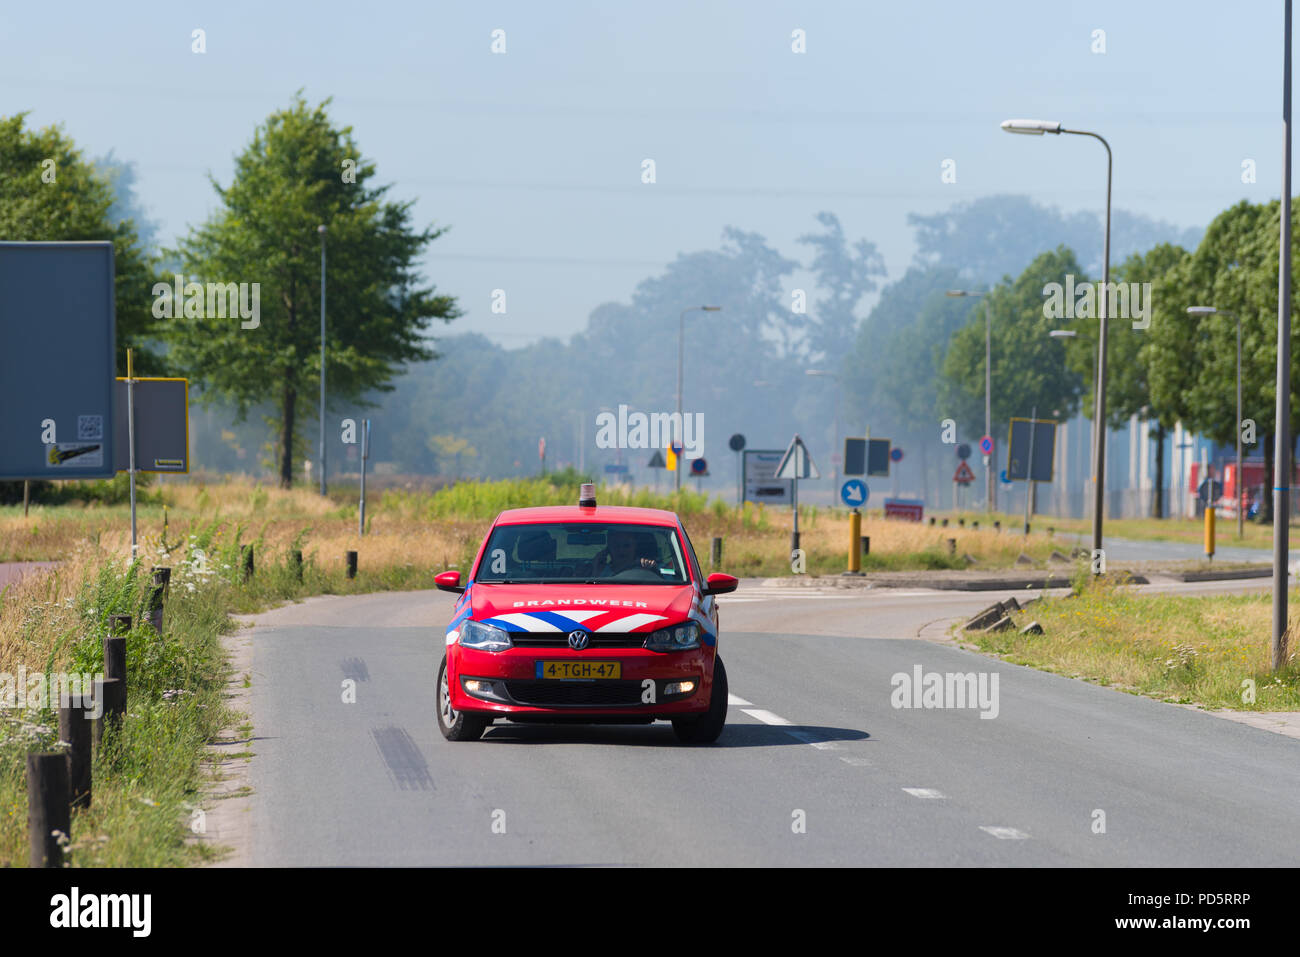 HENGELO, NETHERLANDS - JULY 1, 2018: Fire department commander control car at a large fire Stock Photo